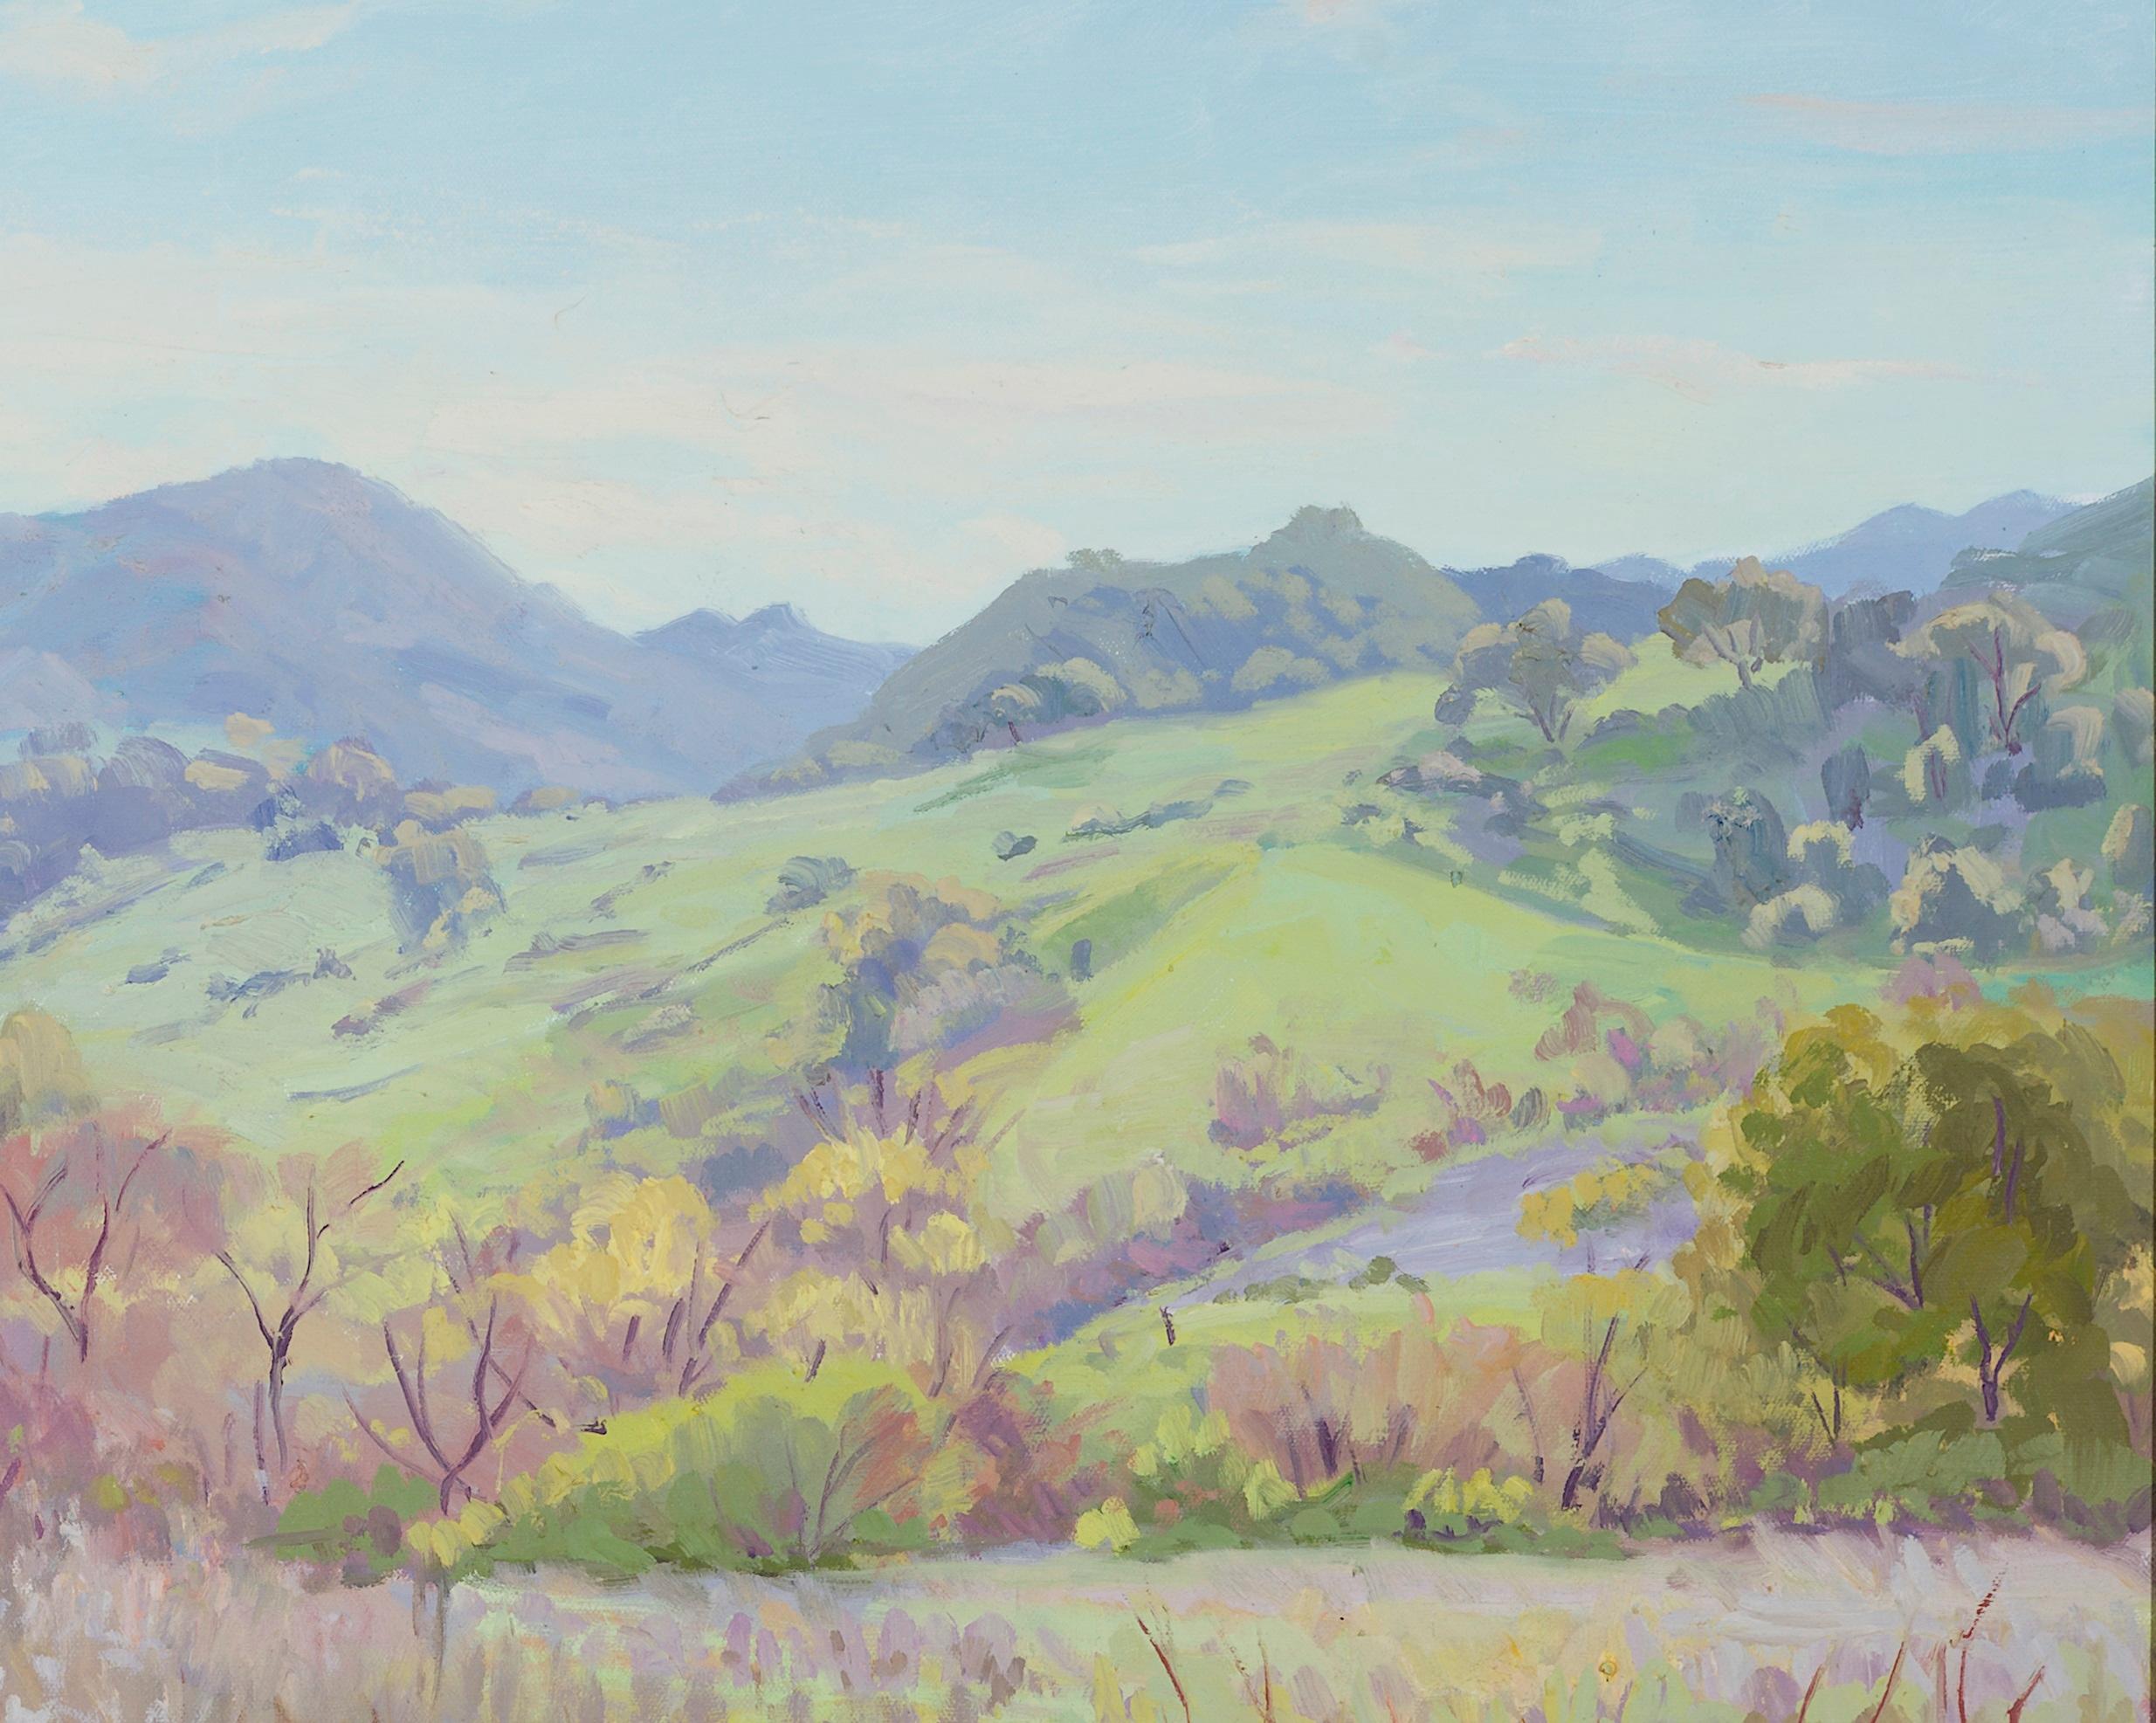 Malibu Mountain, Oil on Canvas , American - Modern Painting by Alfonso Colocho